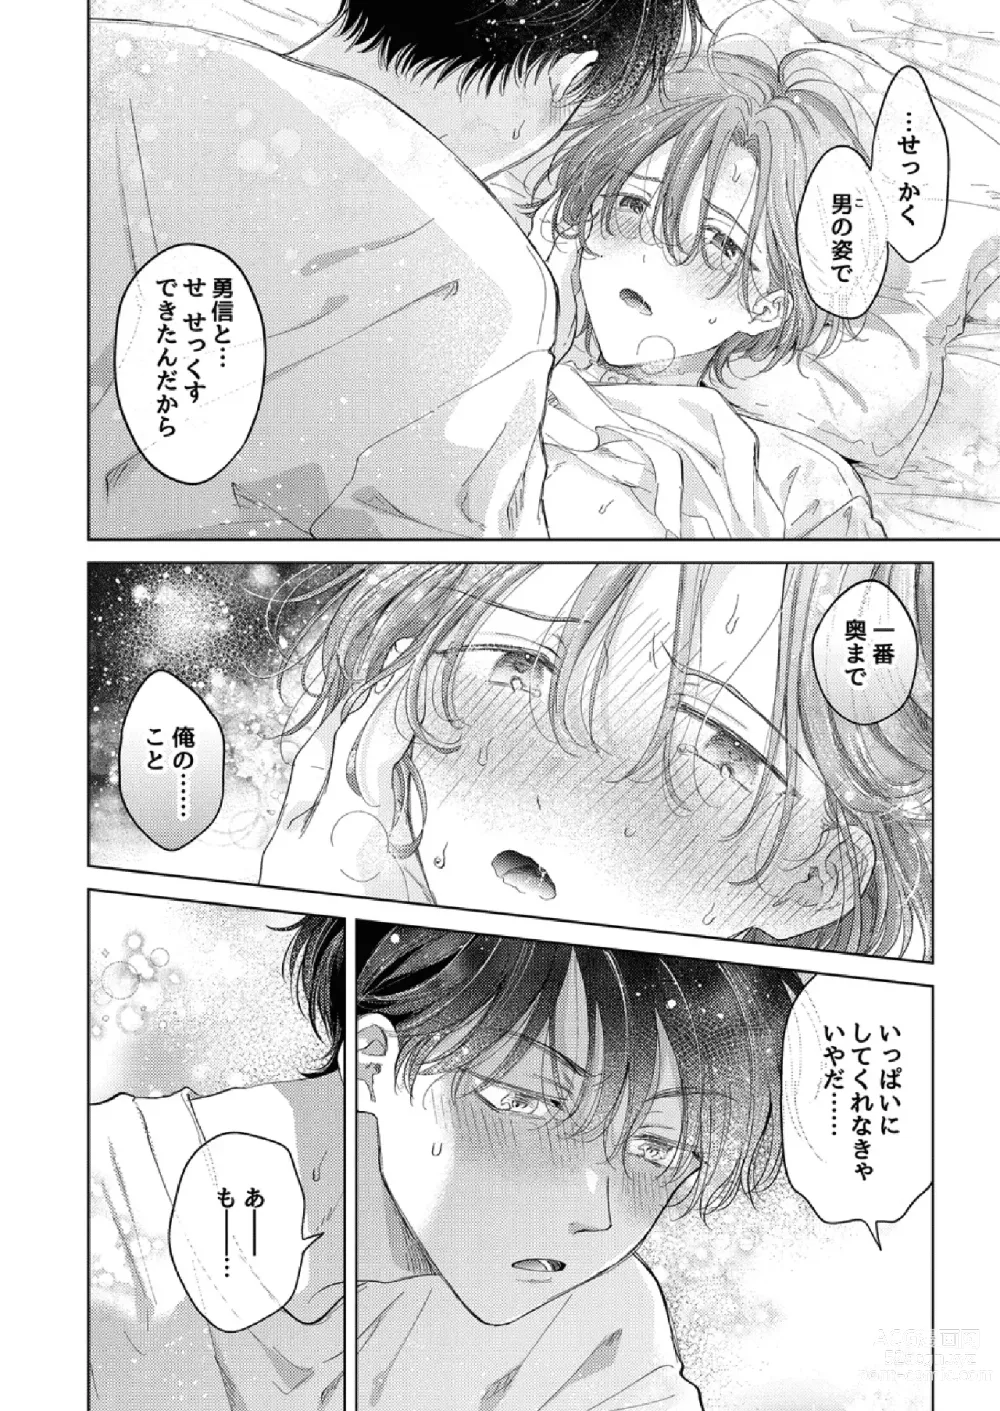 Page 26 of doujinshi How to use Gender-Changing Apps Properly 2